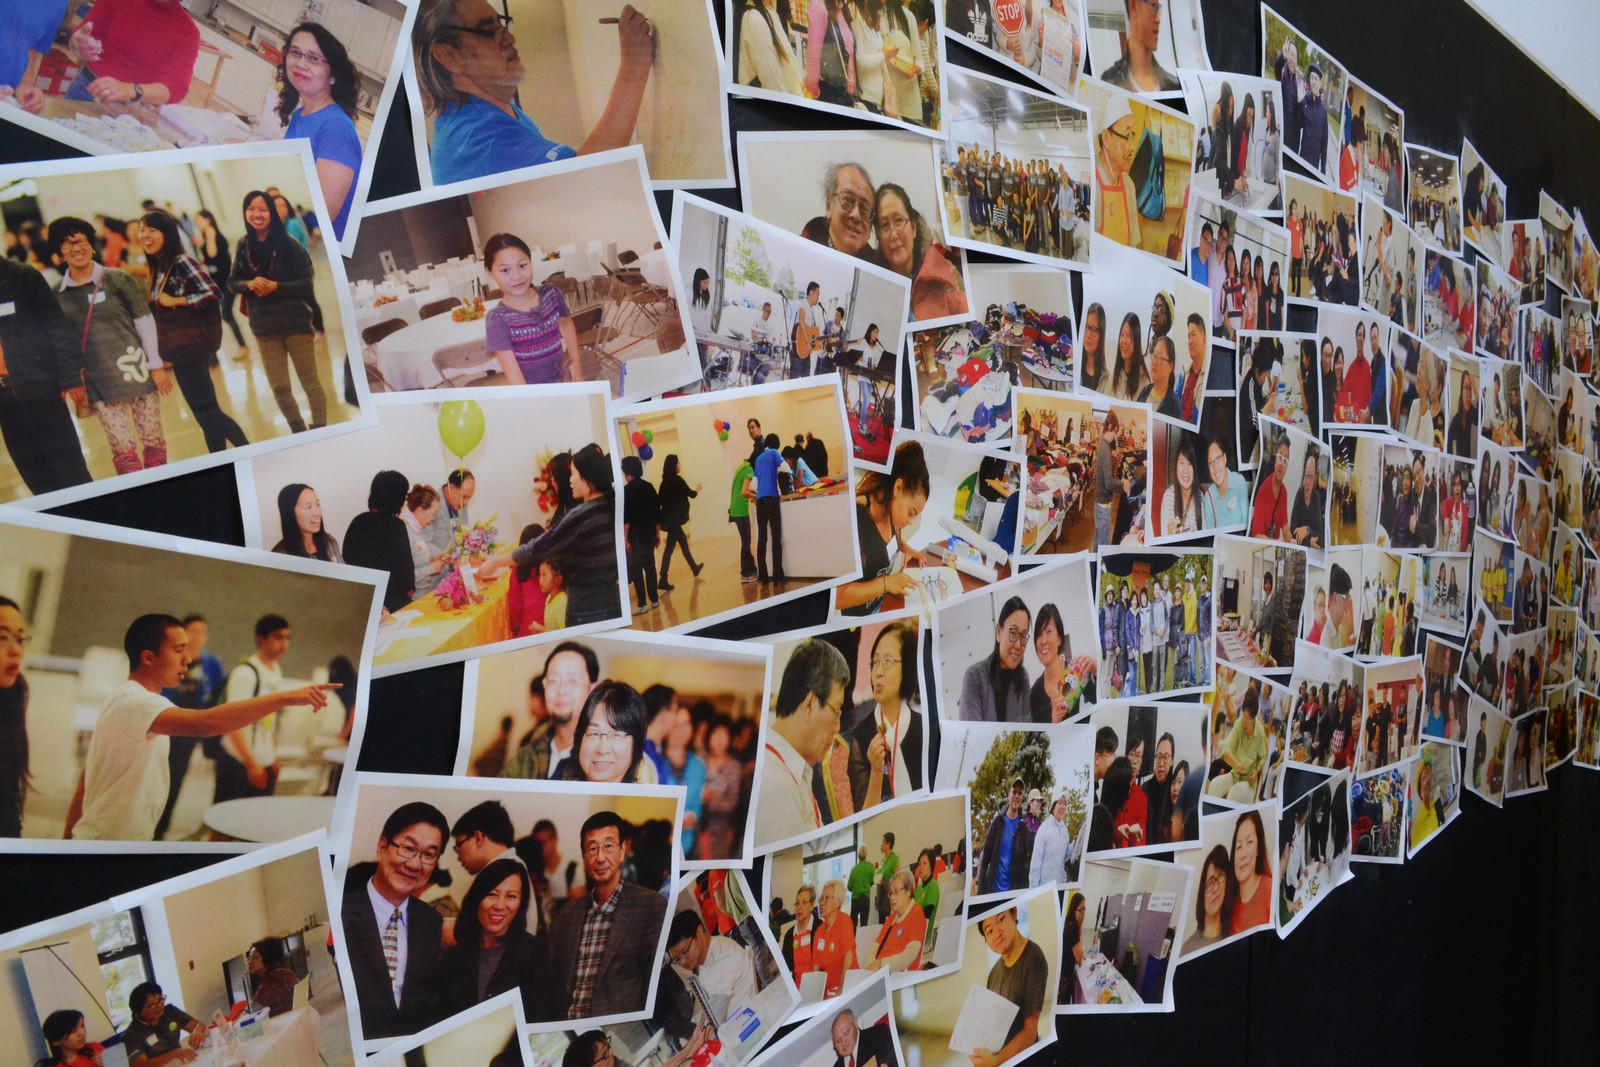 Photos Wall of 105 Gibson Centre's Staff, Volunteers & Events